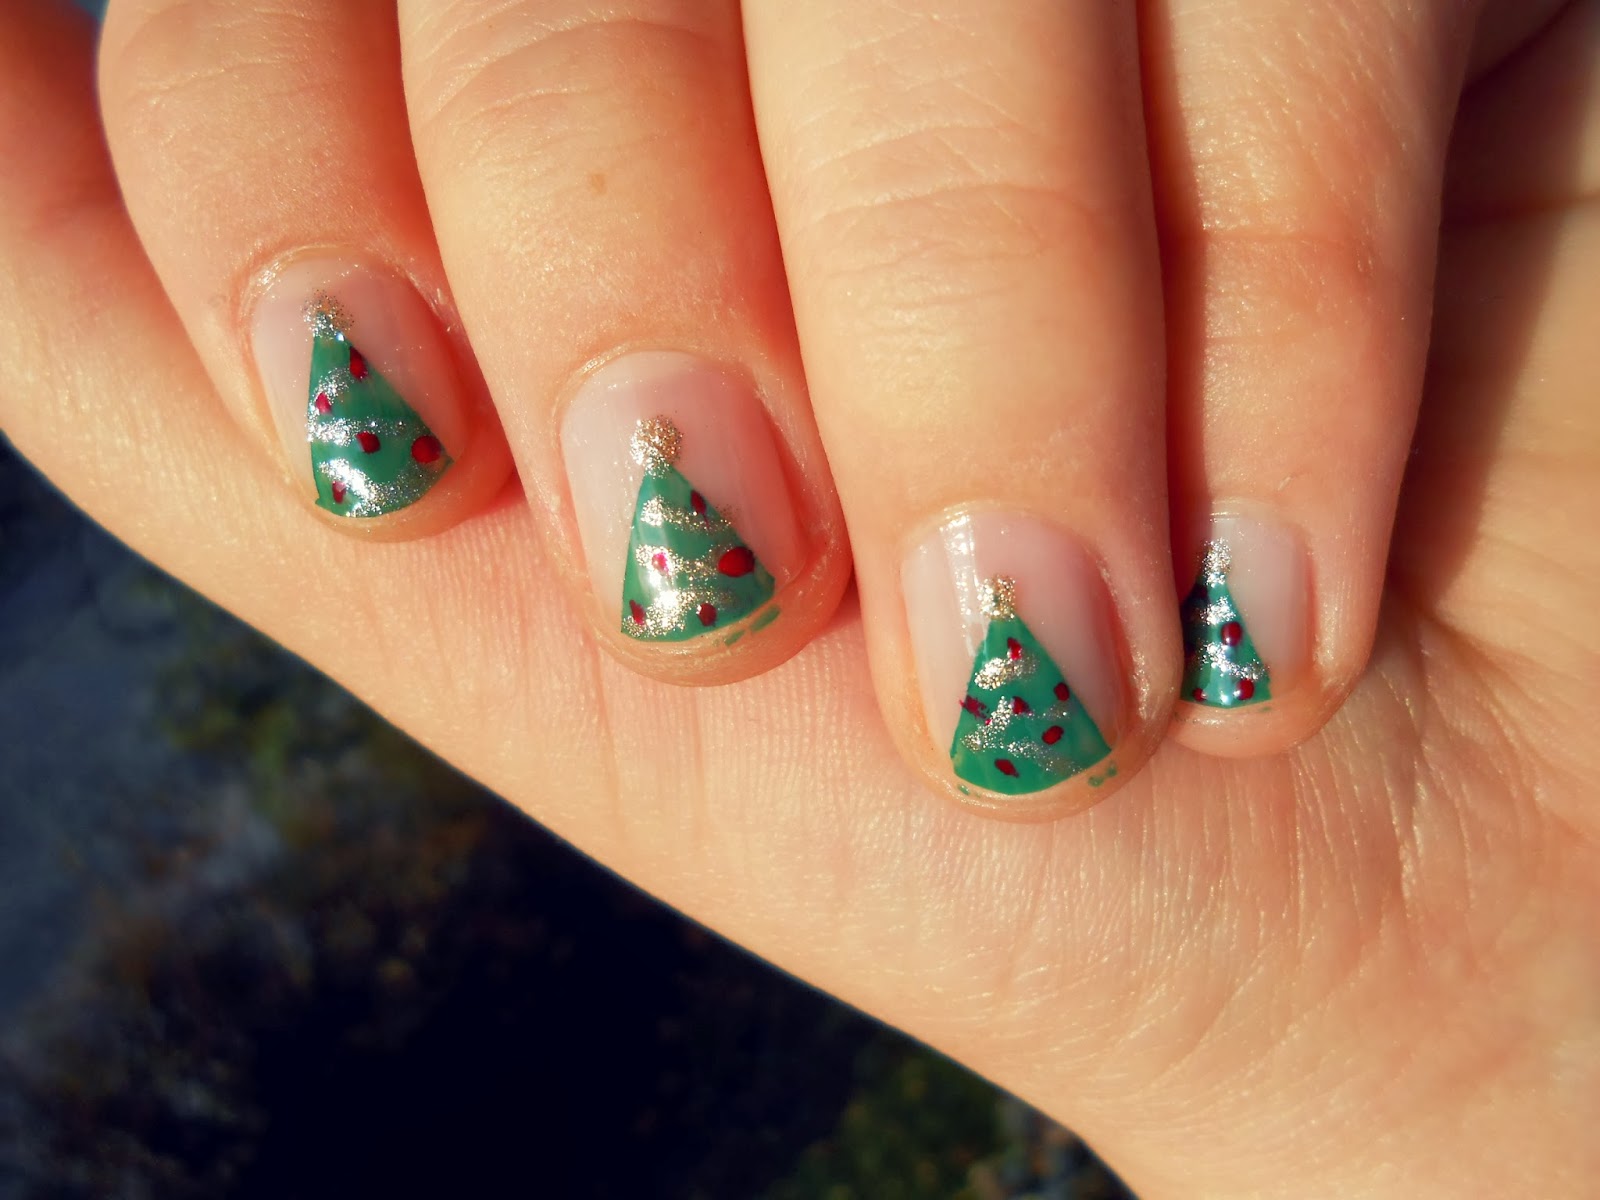 3. "Christmas Tree Nails" - wide 6